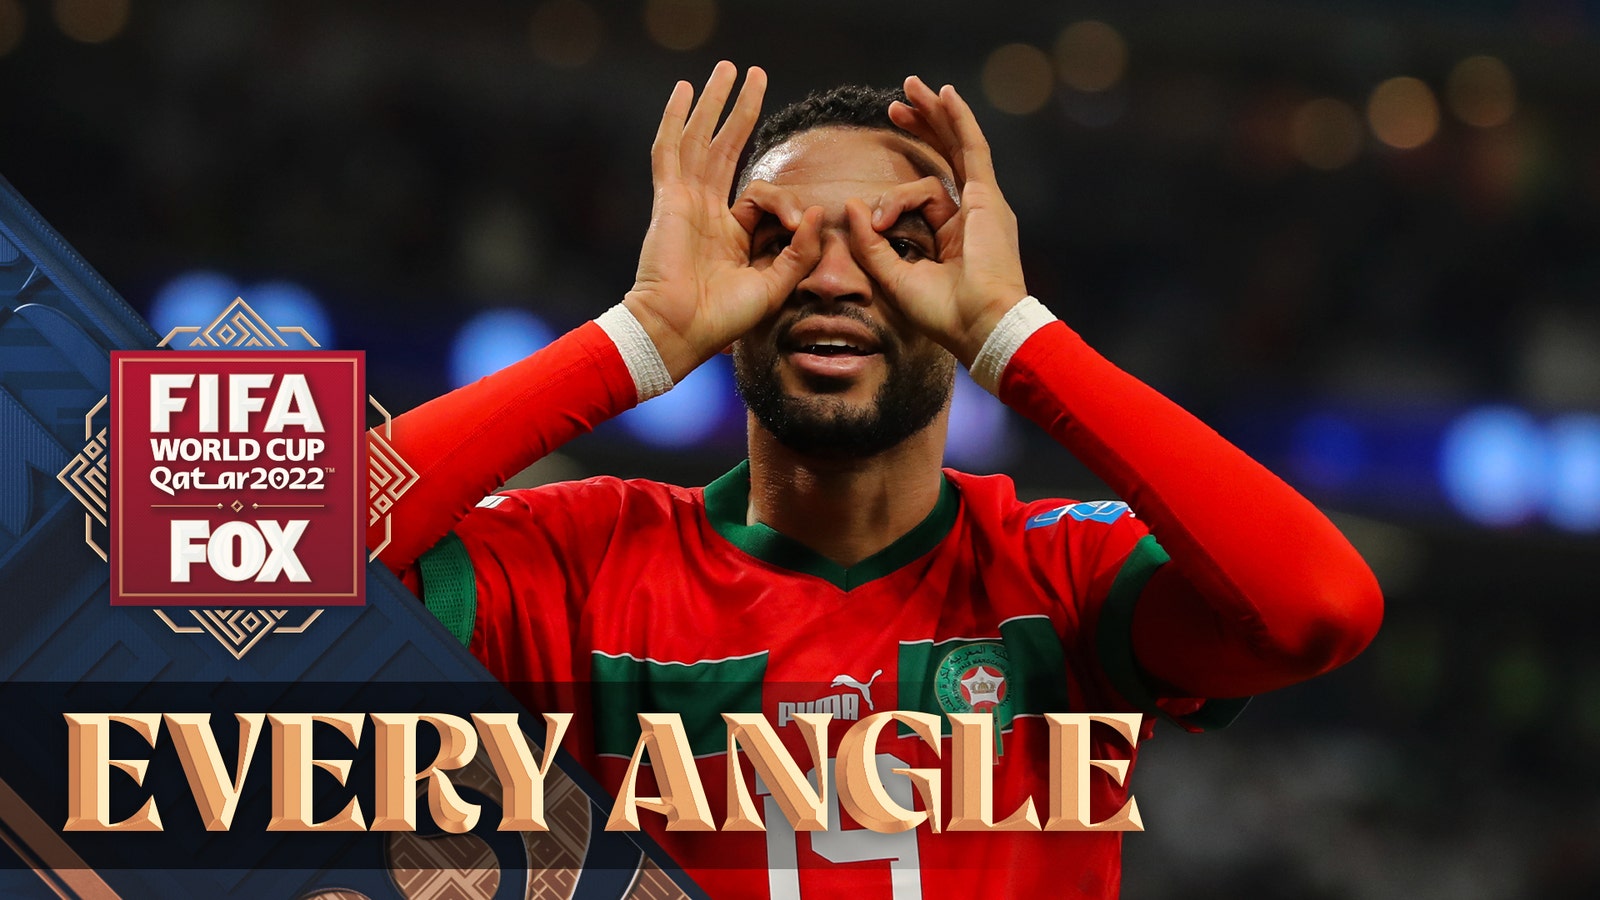 Youssef N-Nesiri scores a ridiculous header for Morocco at the 2022 FIFA World Cup |  Every angle